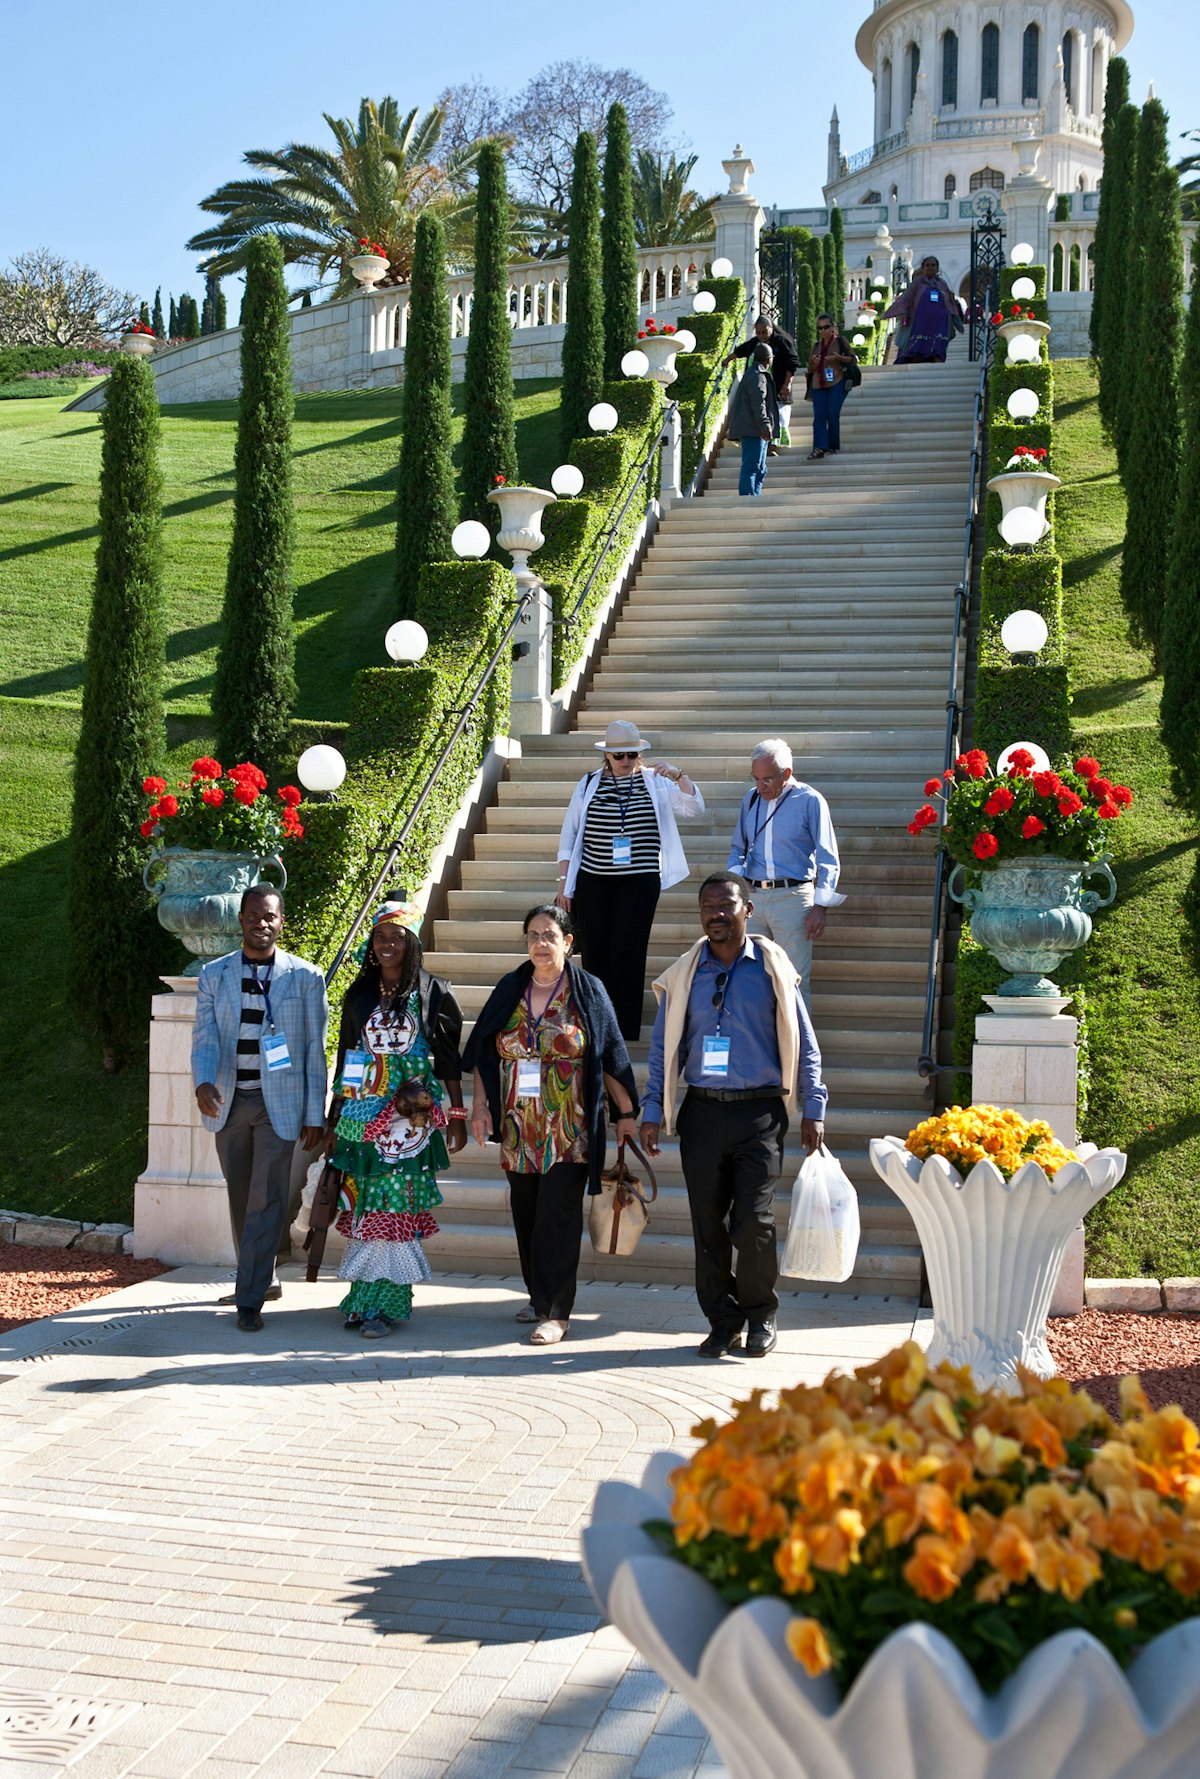 Prior to the opening of the 11th International Baha'i Convention, delegates had the opportunity to visit the Faith's holy places in Haifa and Acre. Here, representatives of National Spiritual Assemblies descend the garden terraces beneath the Shrine of the Bab.